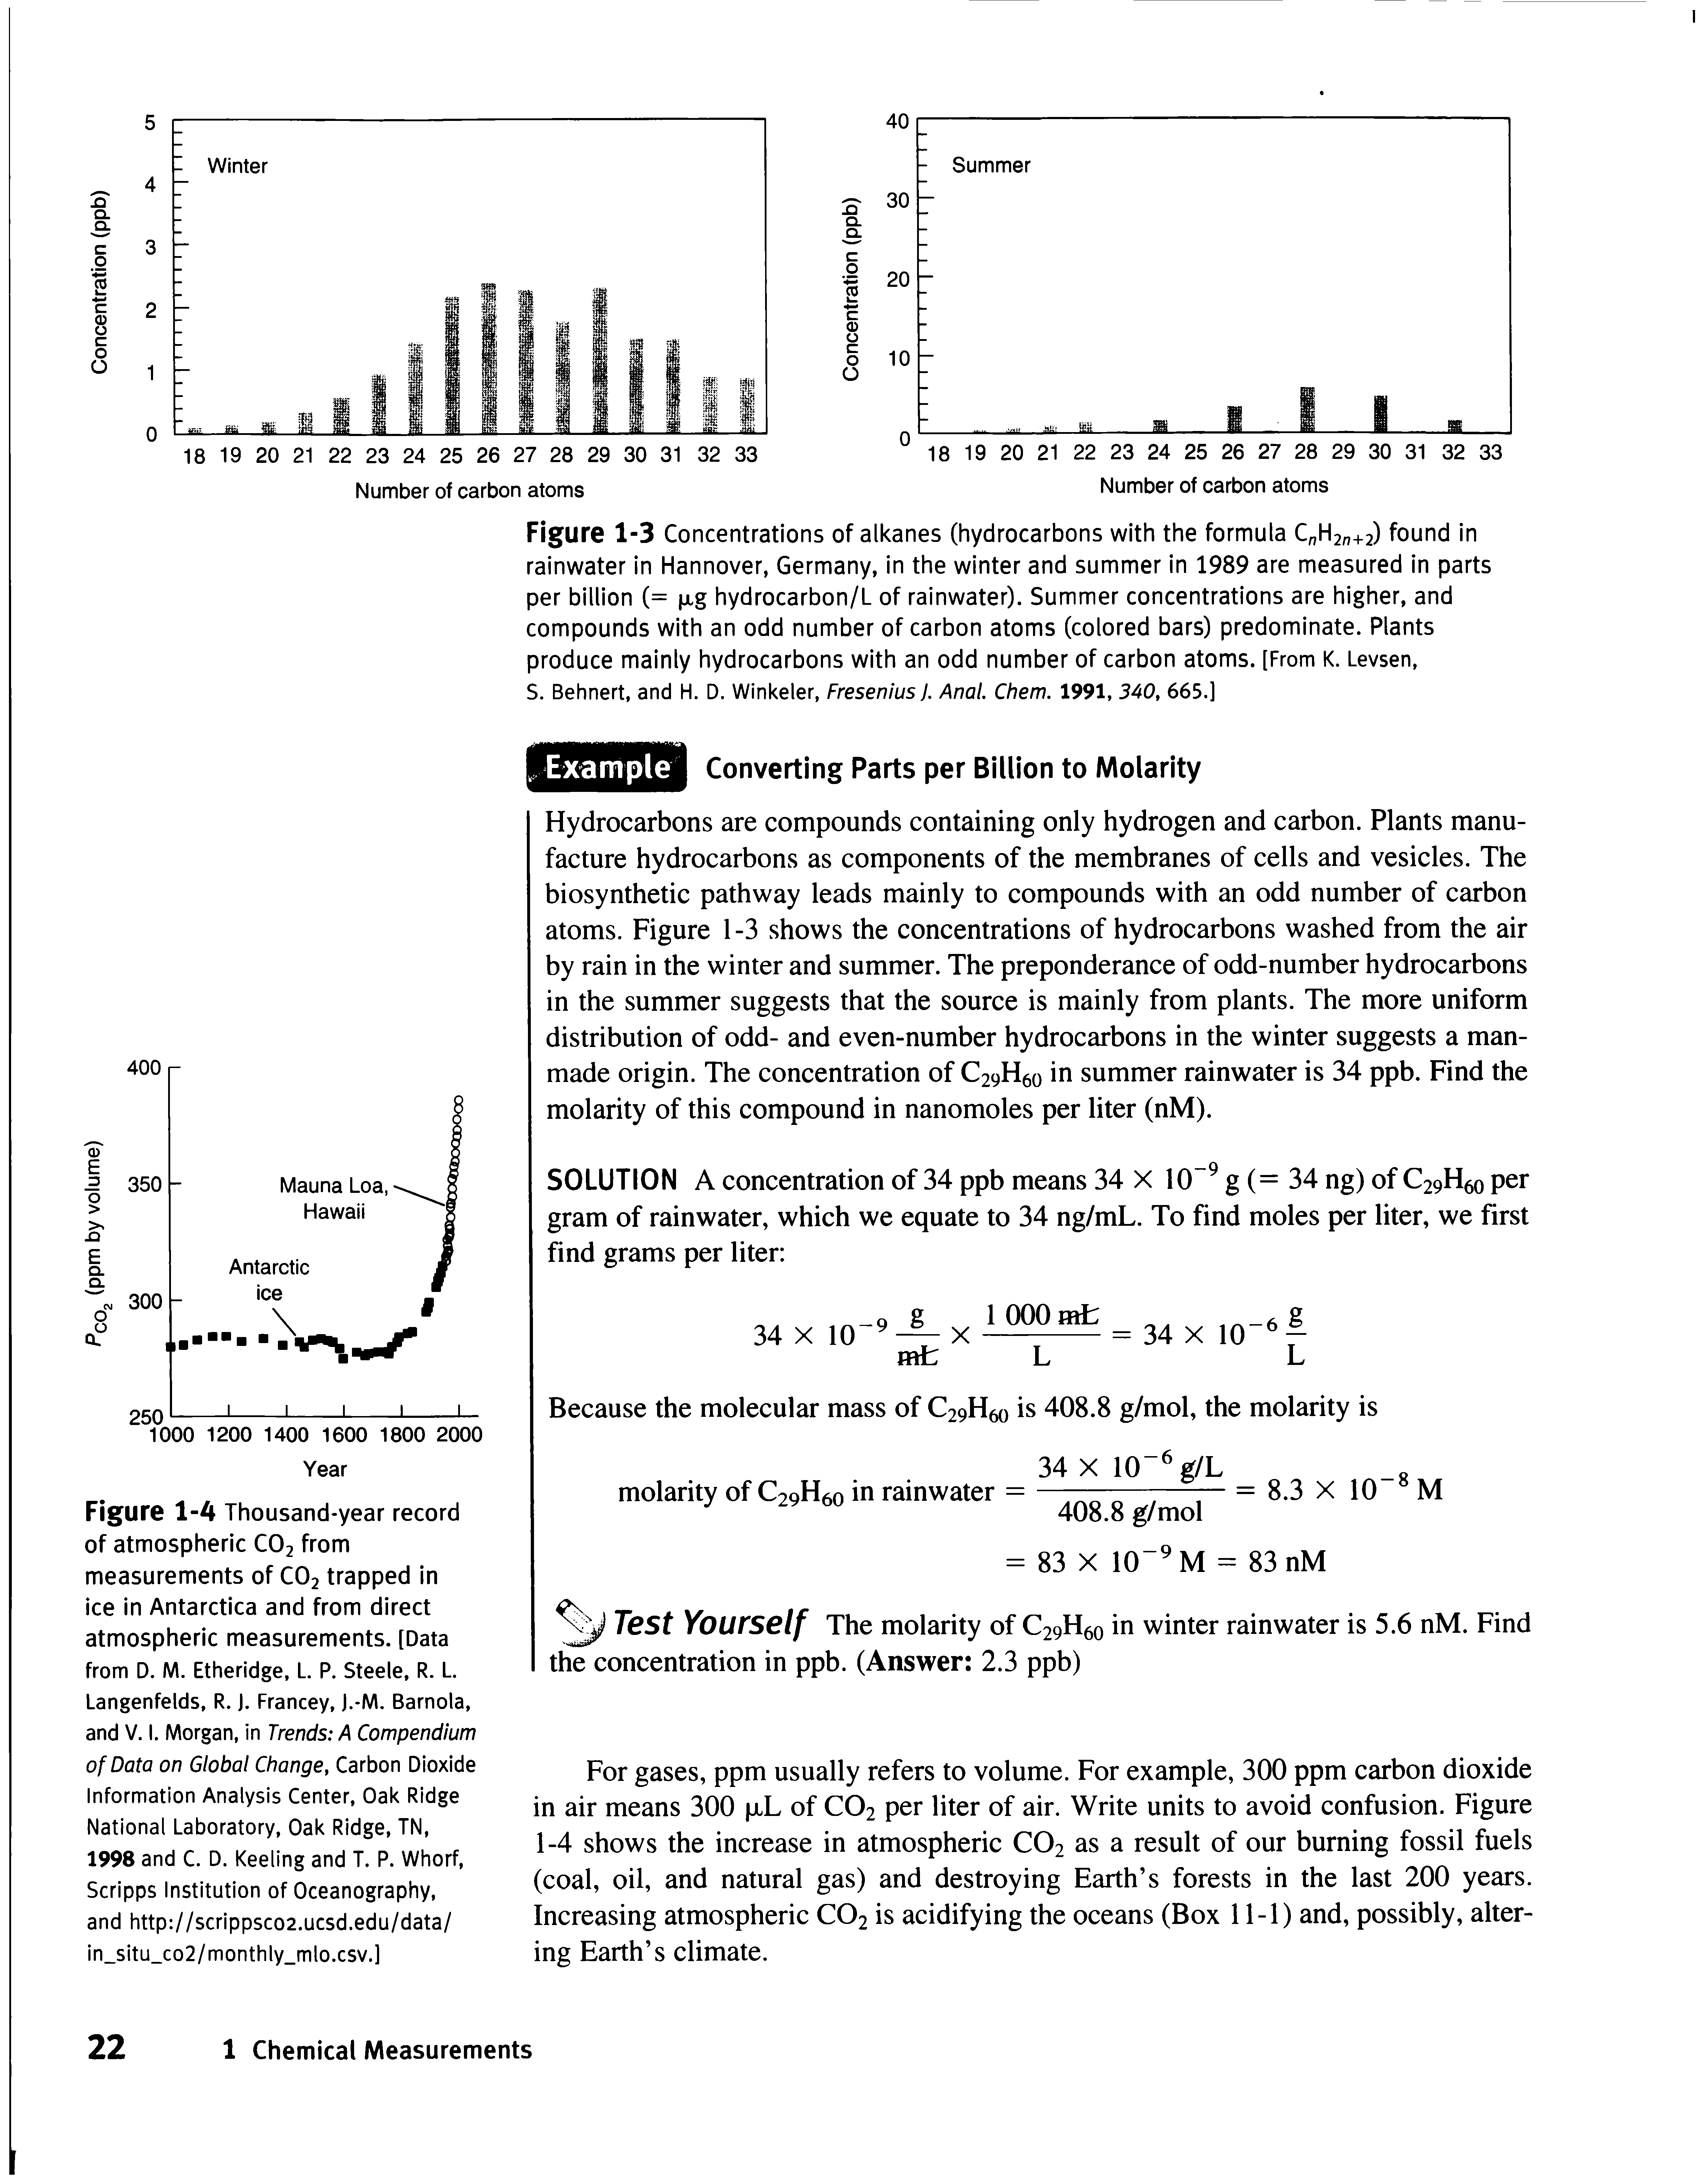 Figure 1-3 Concentrations of alkanes (hydrocarbons with the formula CnH2n+2) found in rainwater in Hannover, Germany, in the winter and summer in 1989 are measured in parts per billion (= jutg hydrocarbon/L of rainwater). Summer concentrations are higher, and compounds with an odd number of carbon atoms (colored bars) predominate. Plants produce mainly hydrocarbons with an odd number of carbon atoms. [From K. Levsen,...